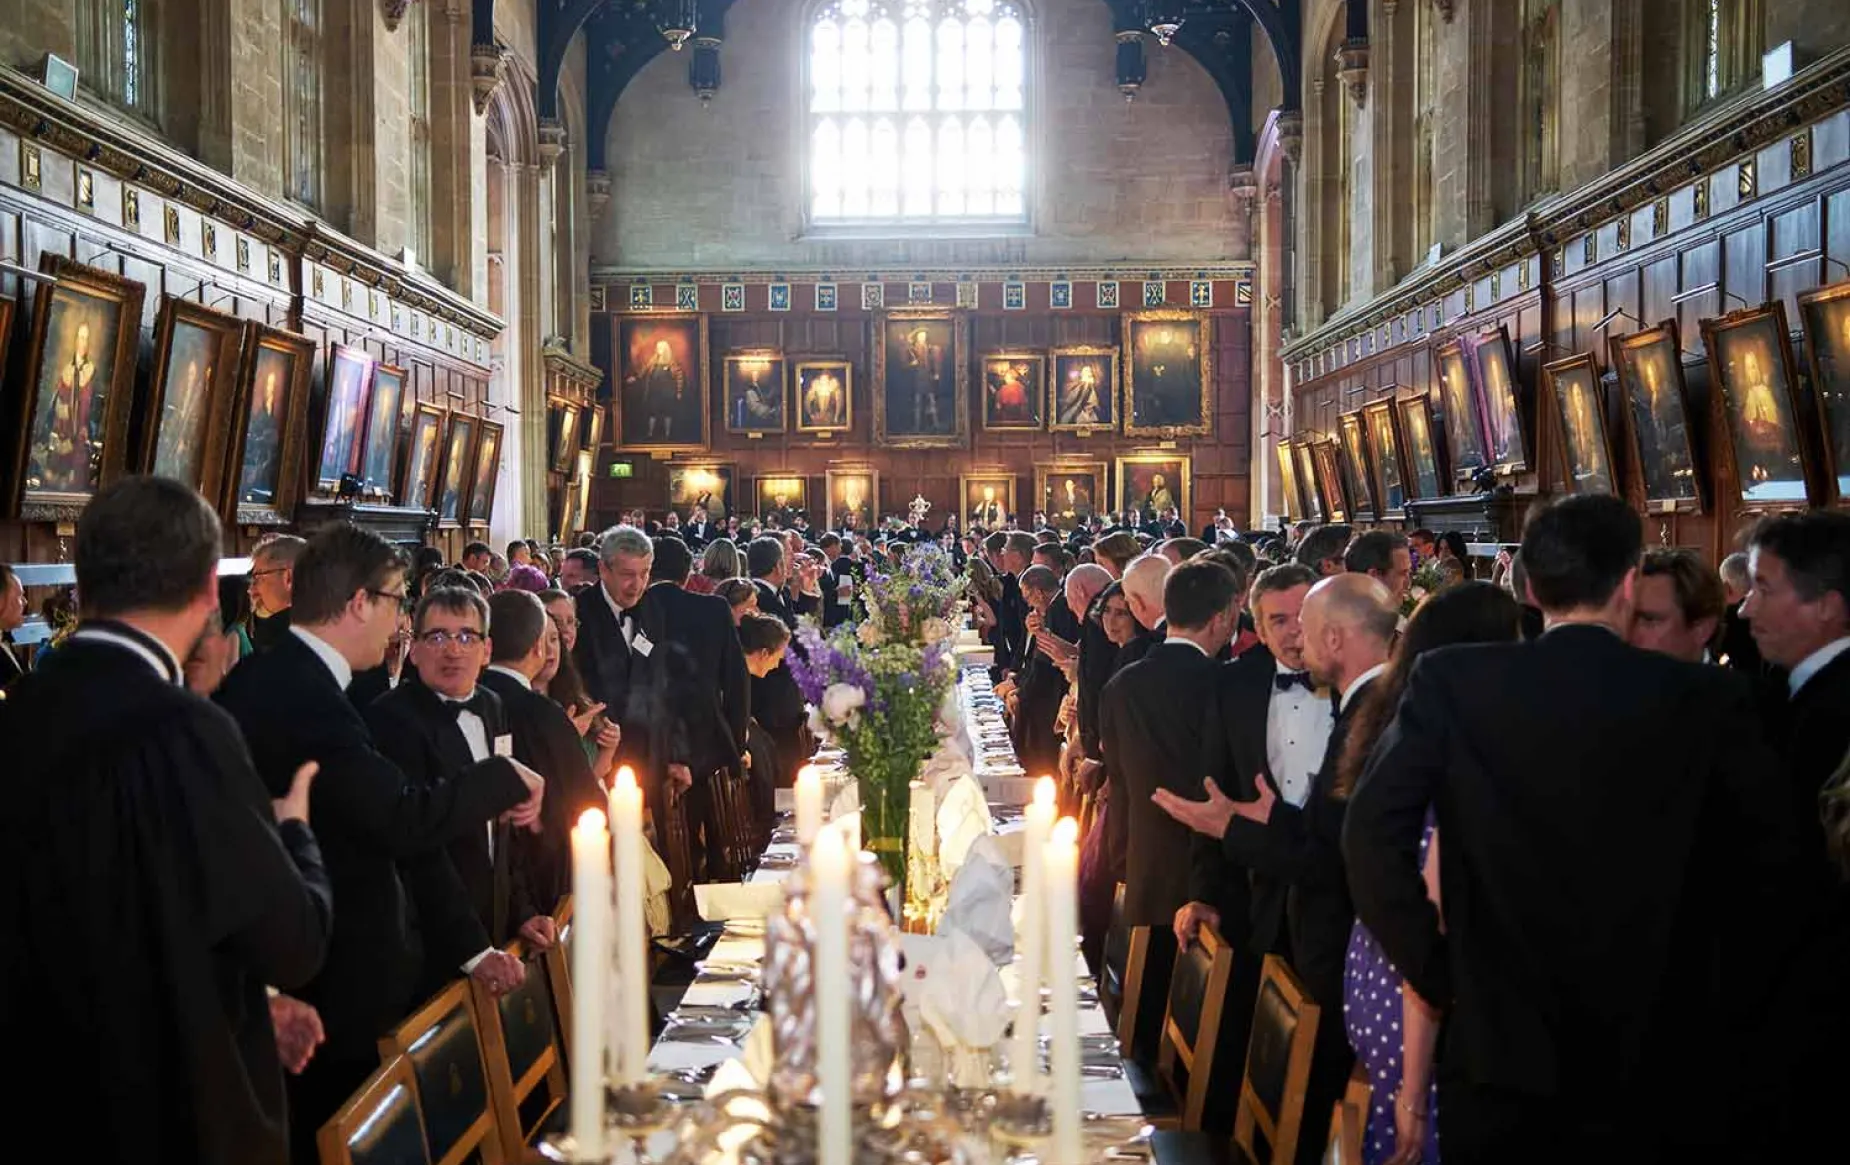 Alumni at a dinner in the Great Hall